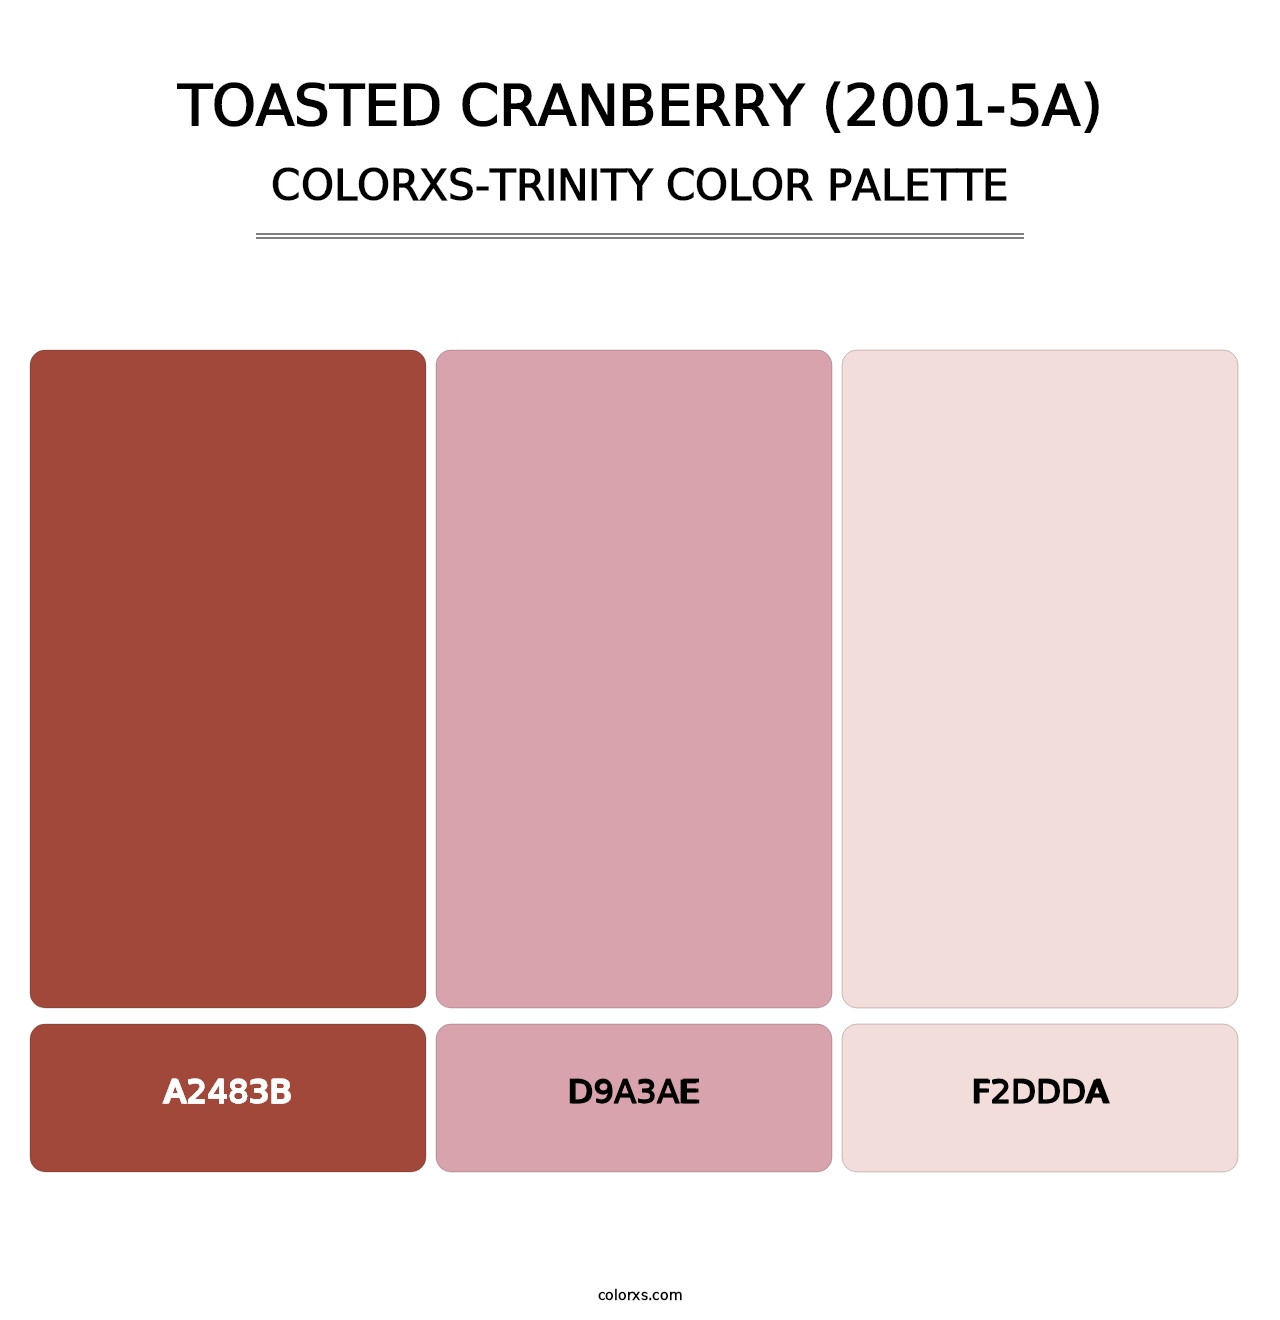 Toasted Cranberry (2001-5A) - Colorxs Trinity Palette